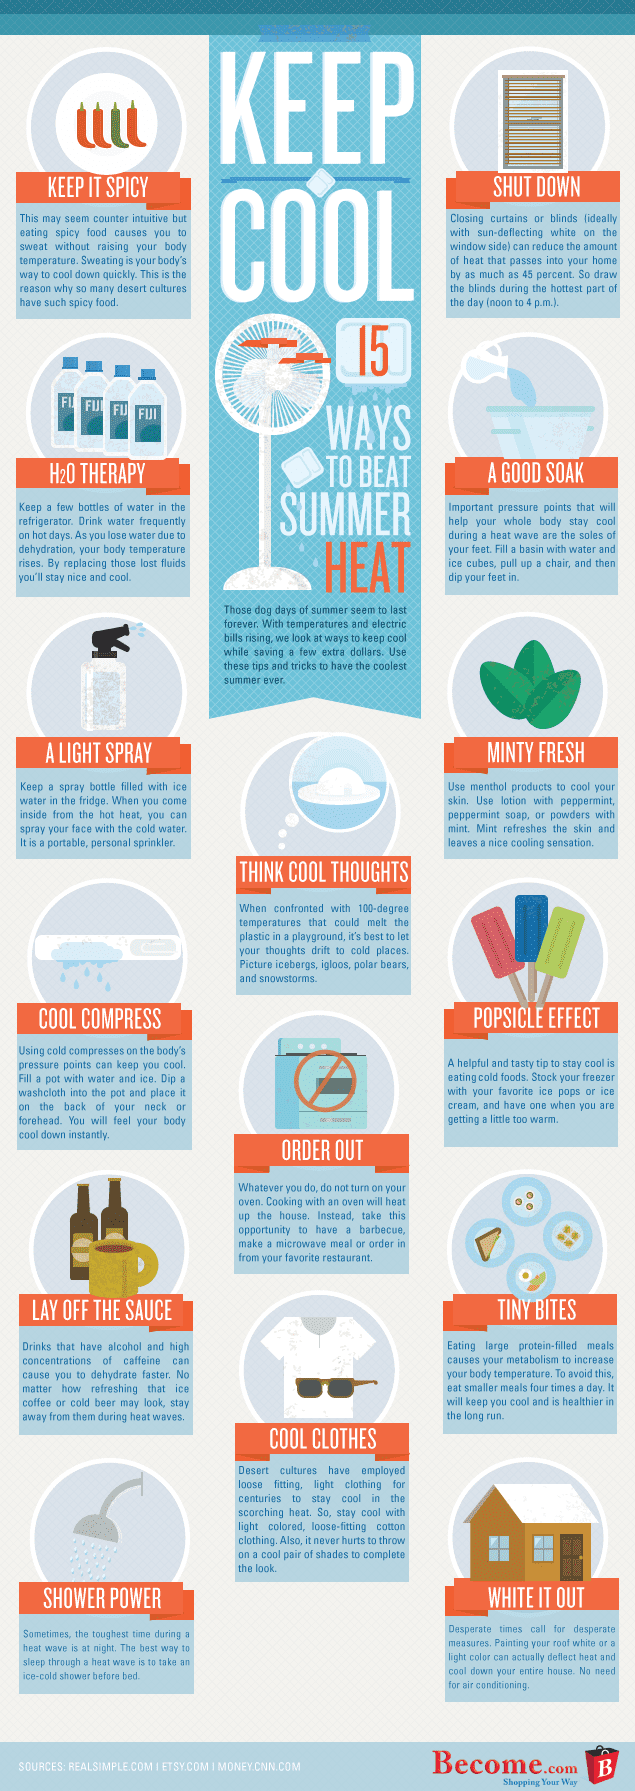 Ways to Keep Cool During the Summer